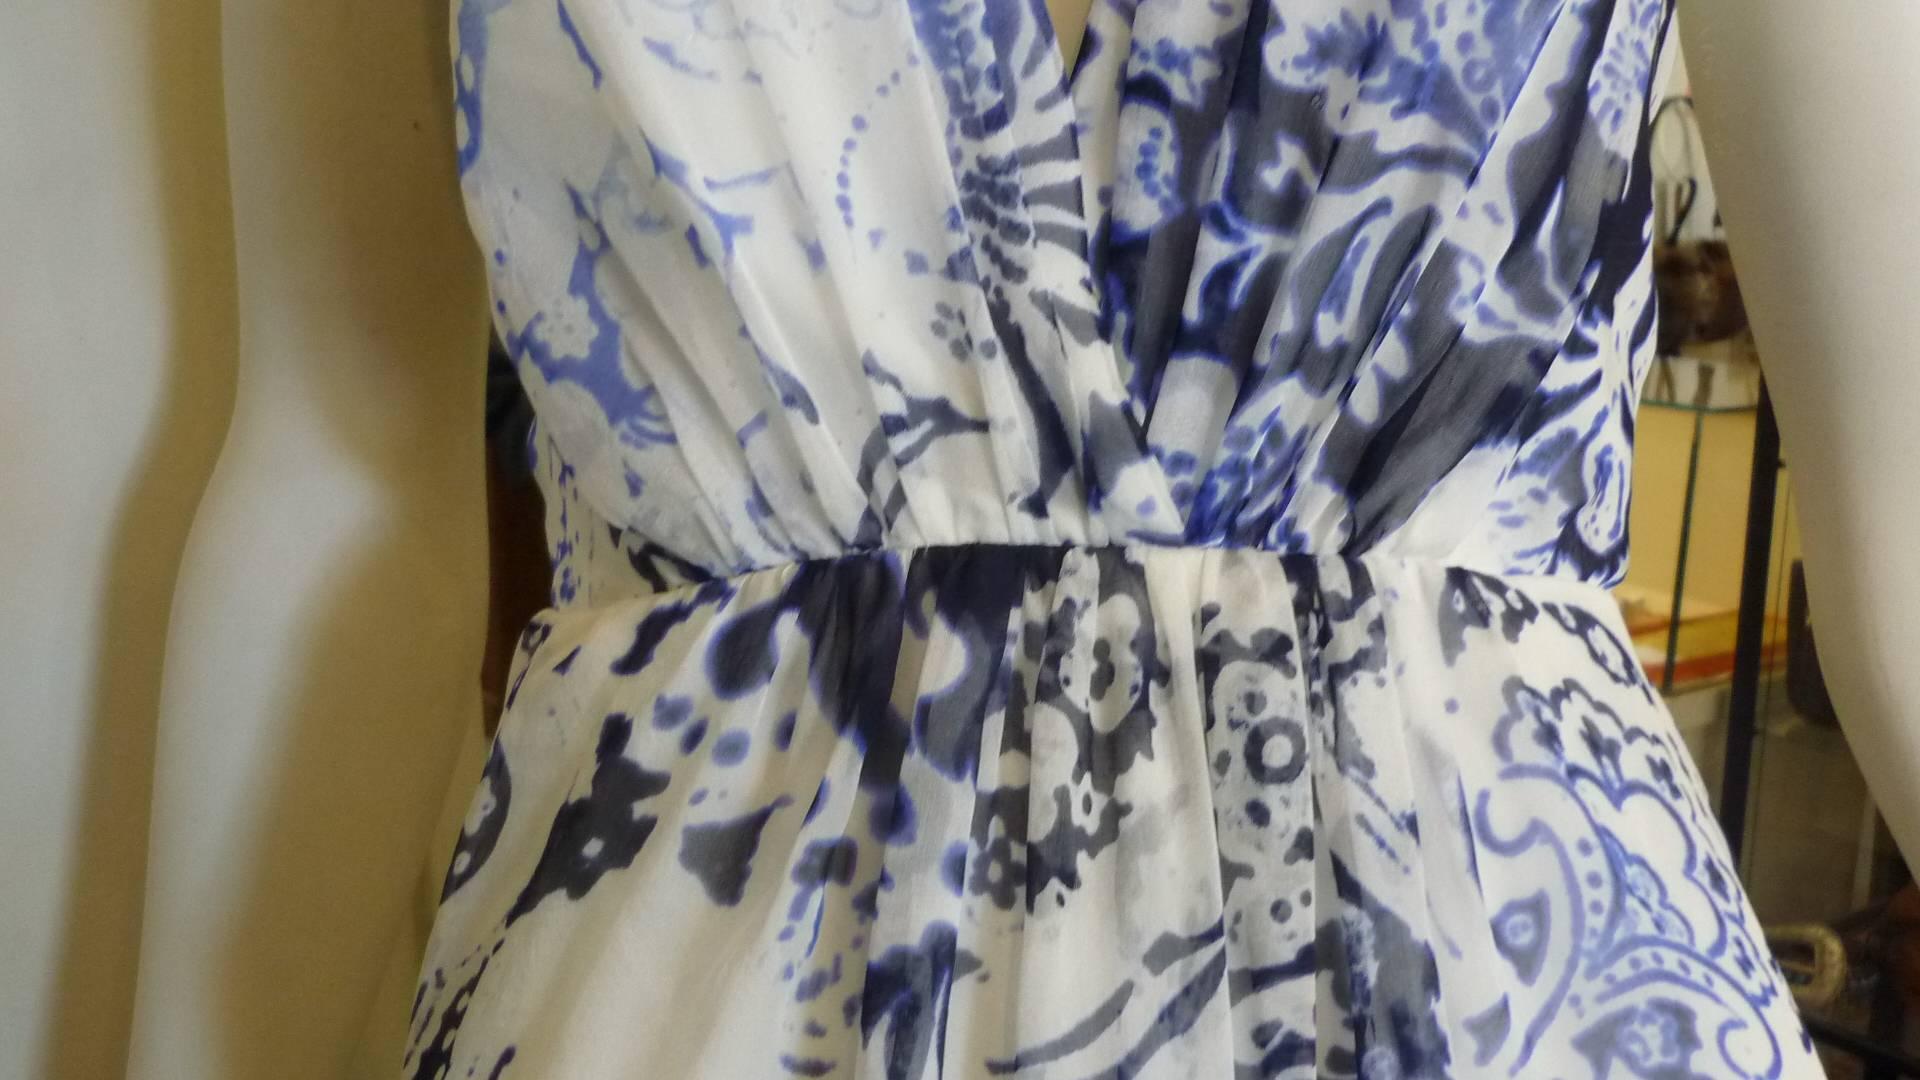 Silk chiffon (material tag missing) with a paisley floral print in white and blue, this dress has a lovely plunging neckline; a low back, and a longer hem in the back which forms a train. 